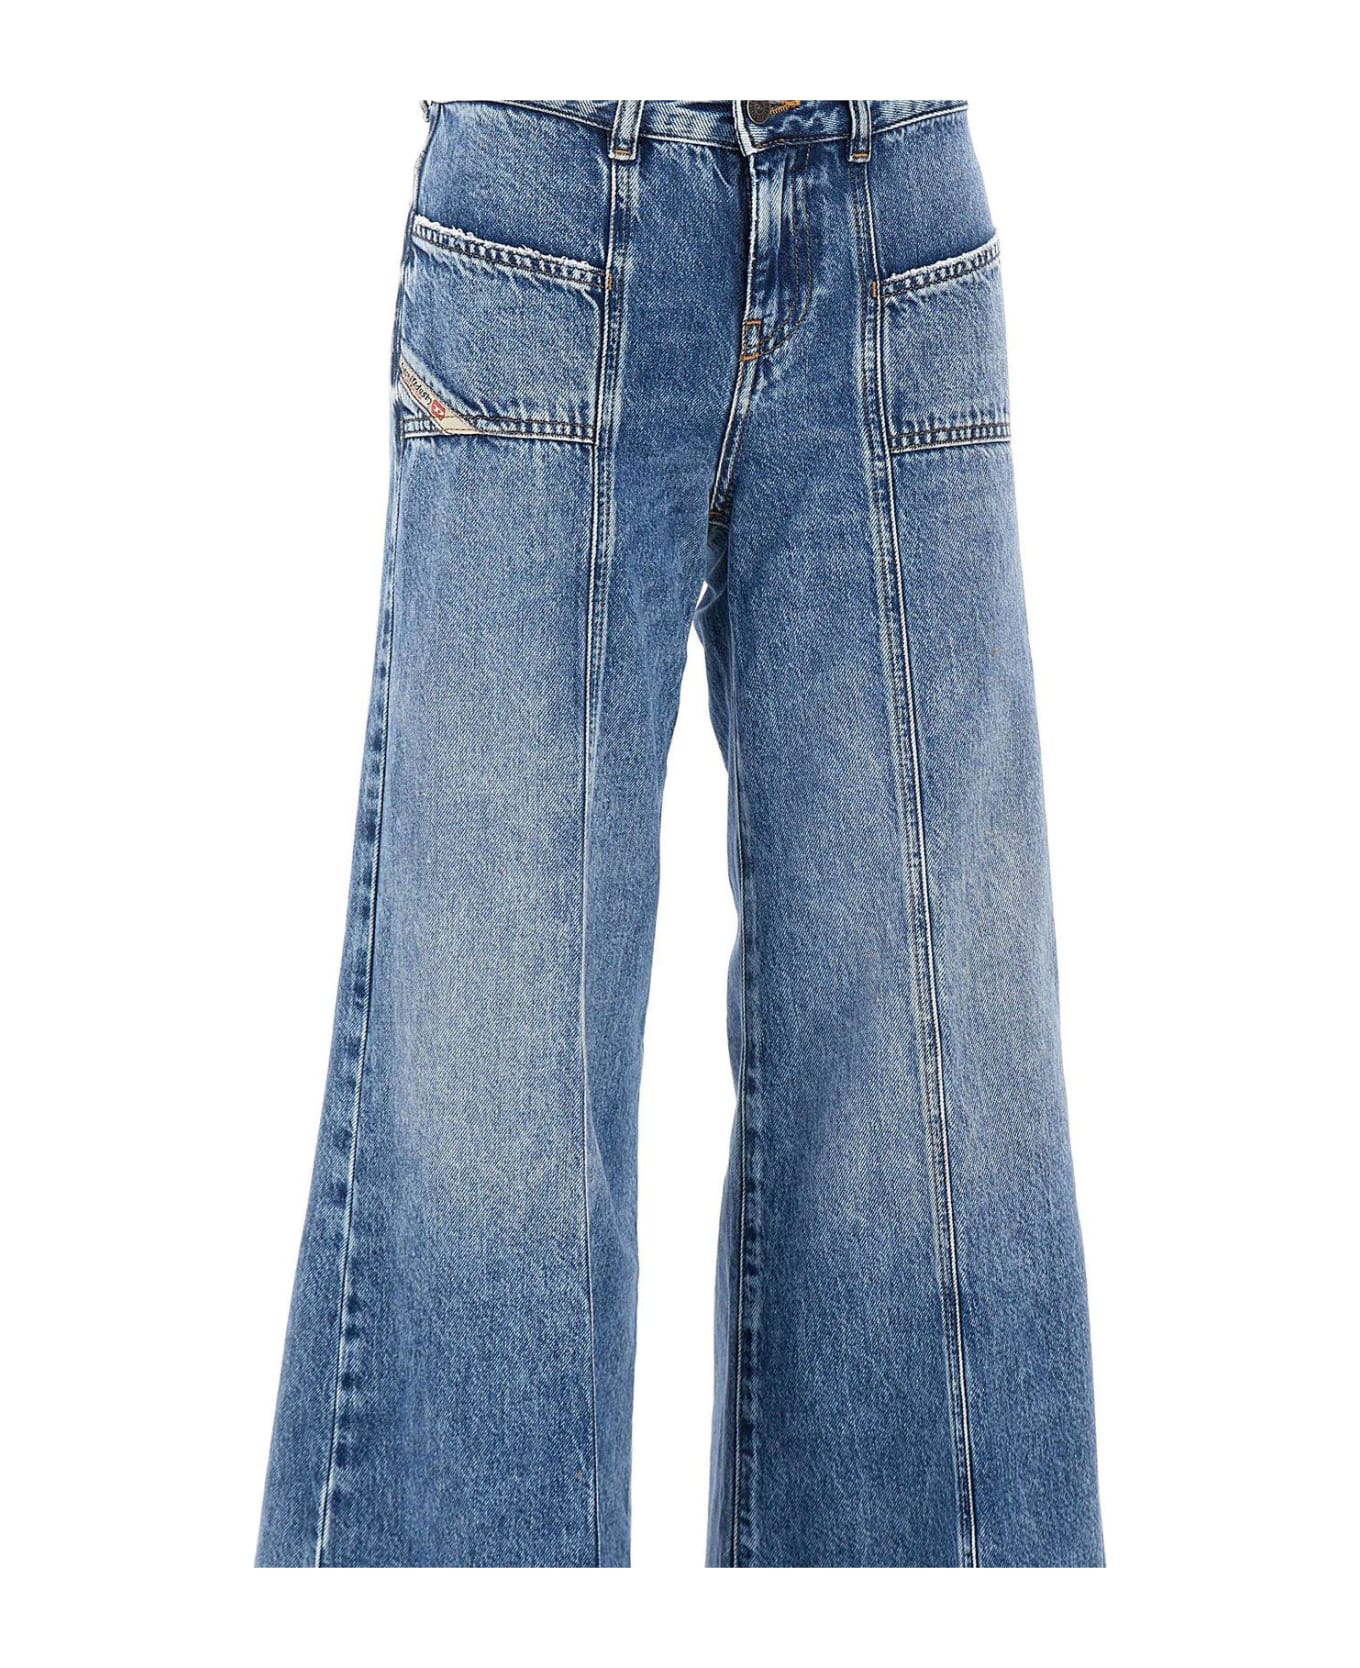 Diesel D-akii Flared Panelled Jeans - Stone Washed